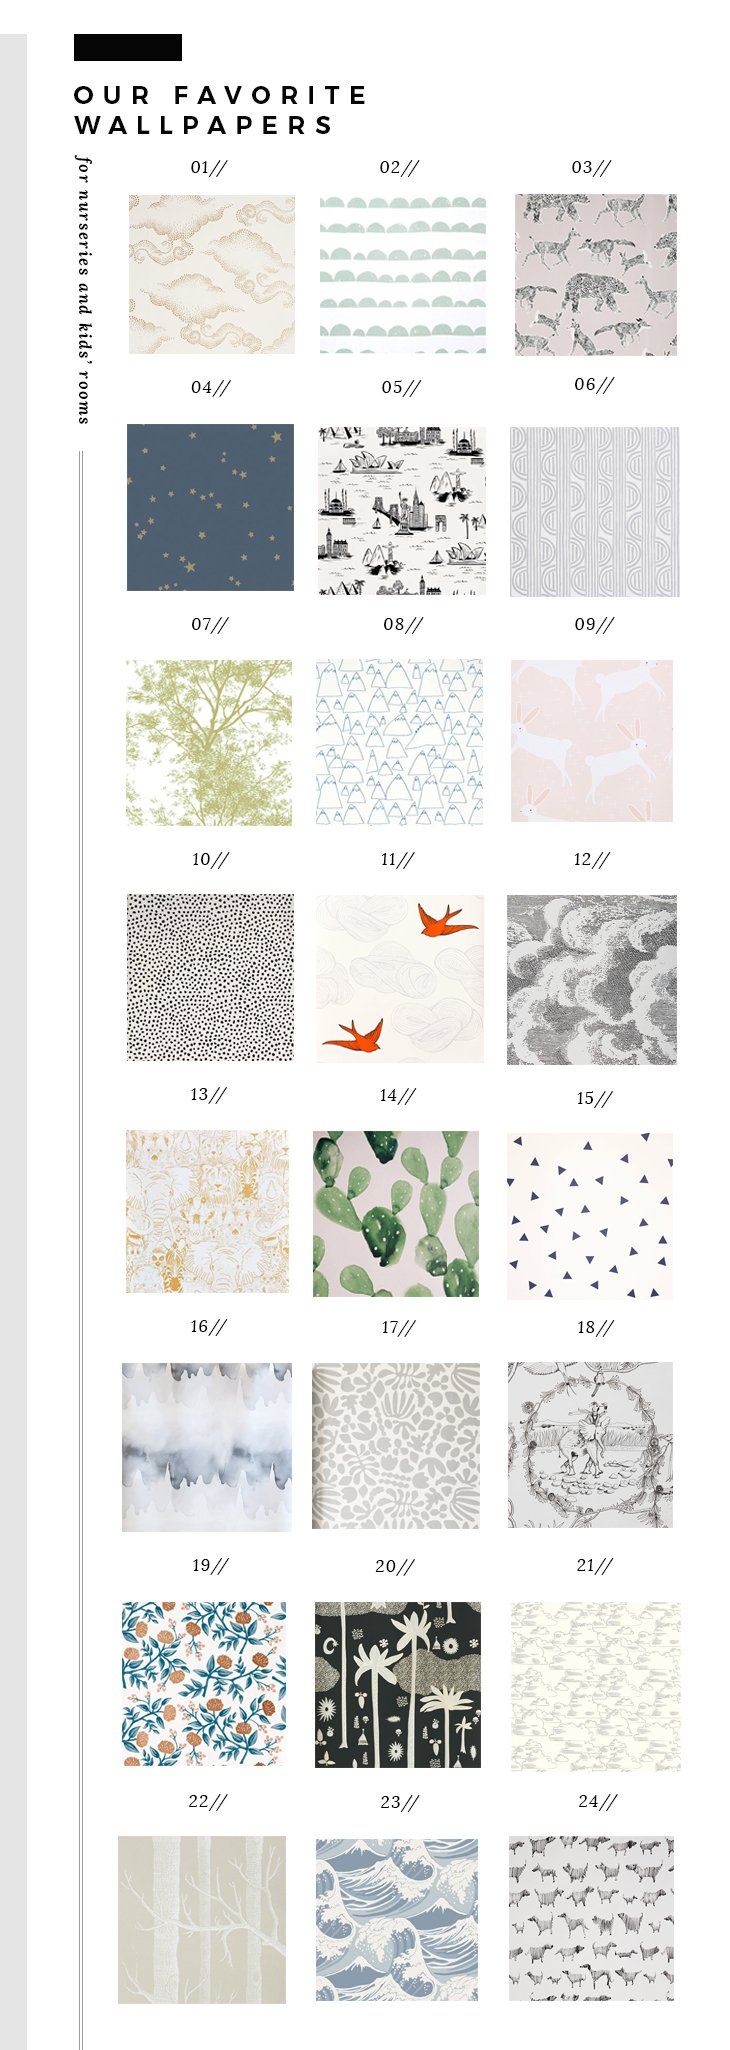 wallpapers for nurseries and kids rooms